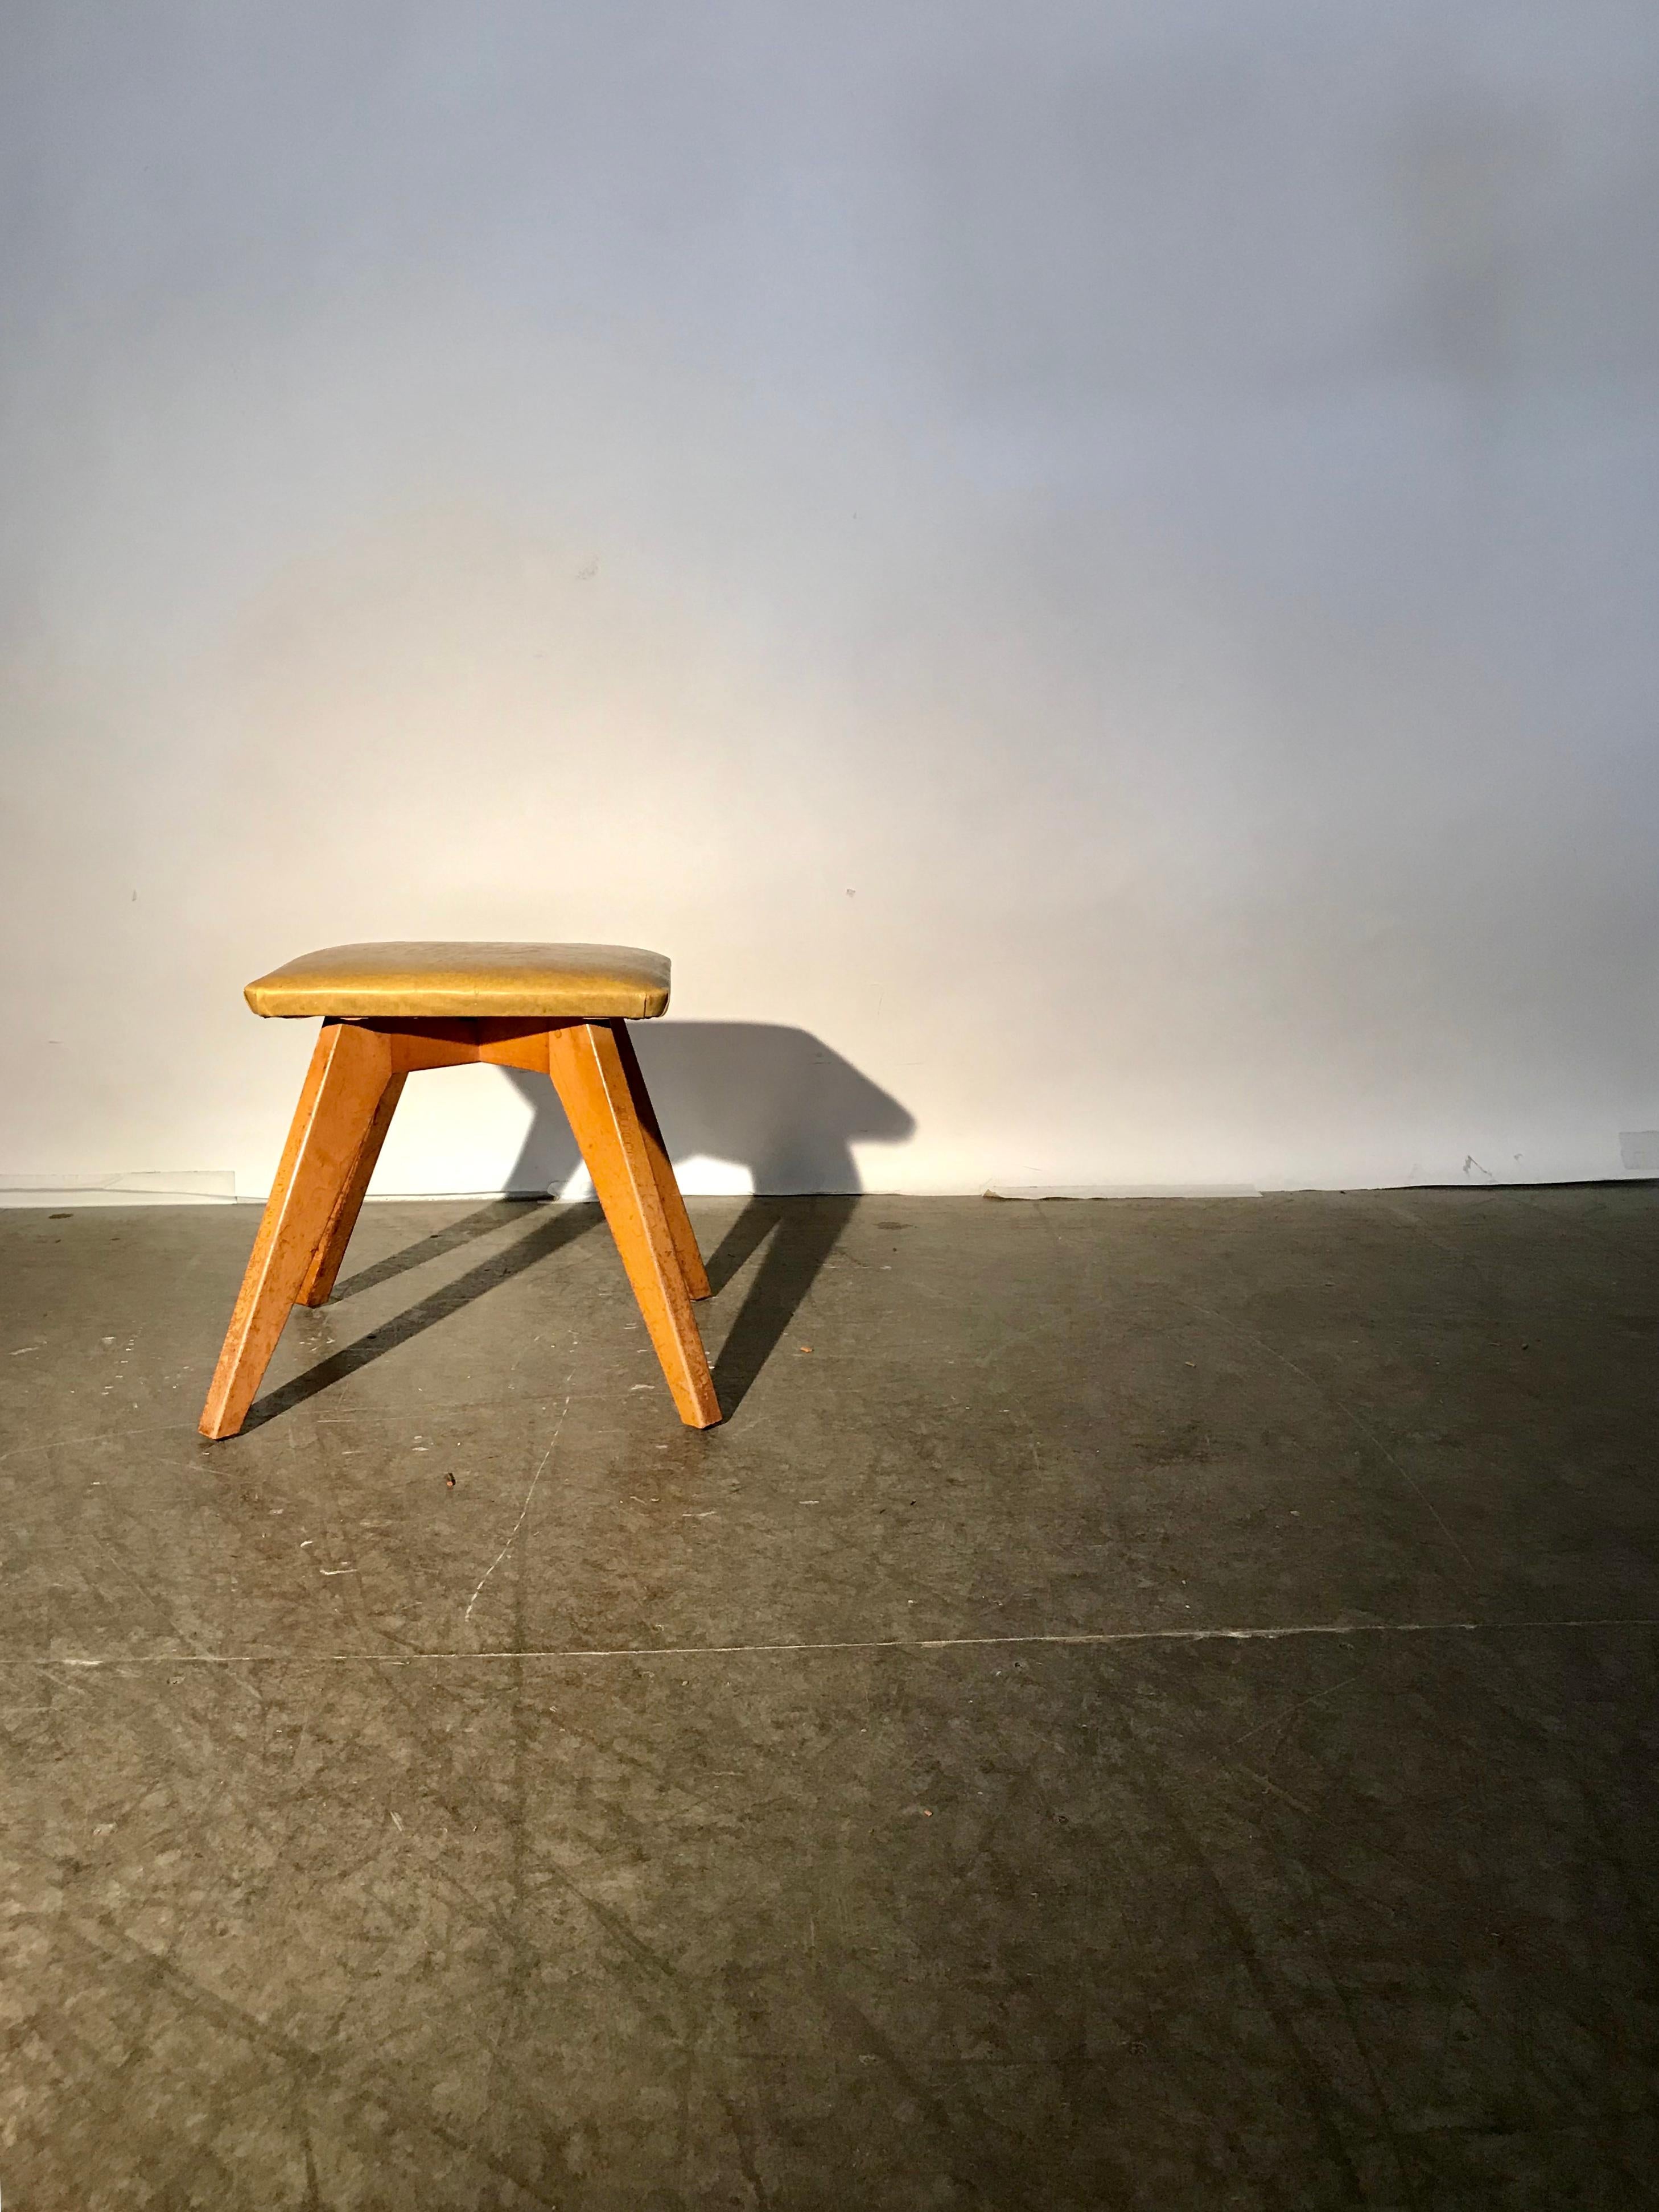 Mid-20th Century Rare and Early Jens Risom Stool for Knoll Associates, New York City For Sale